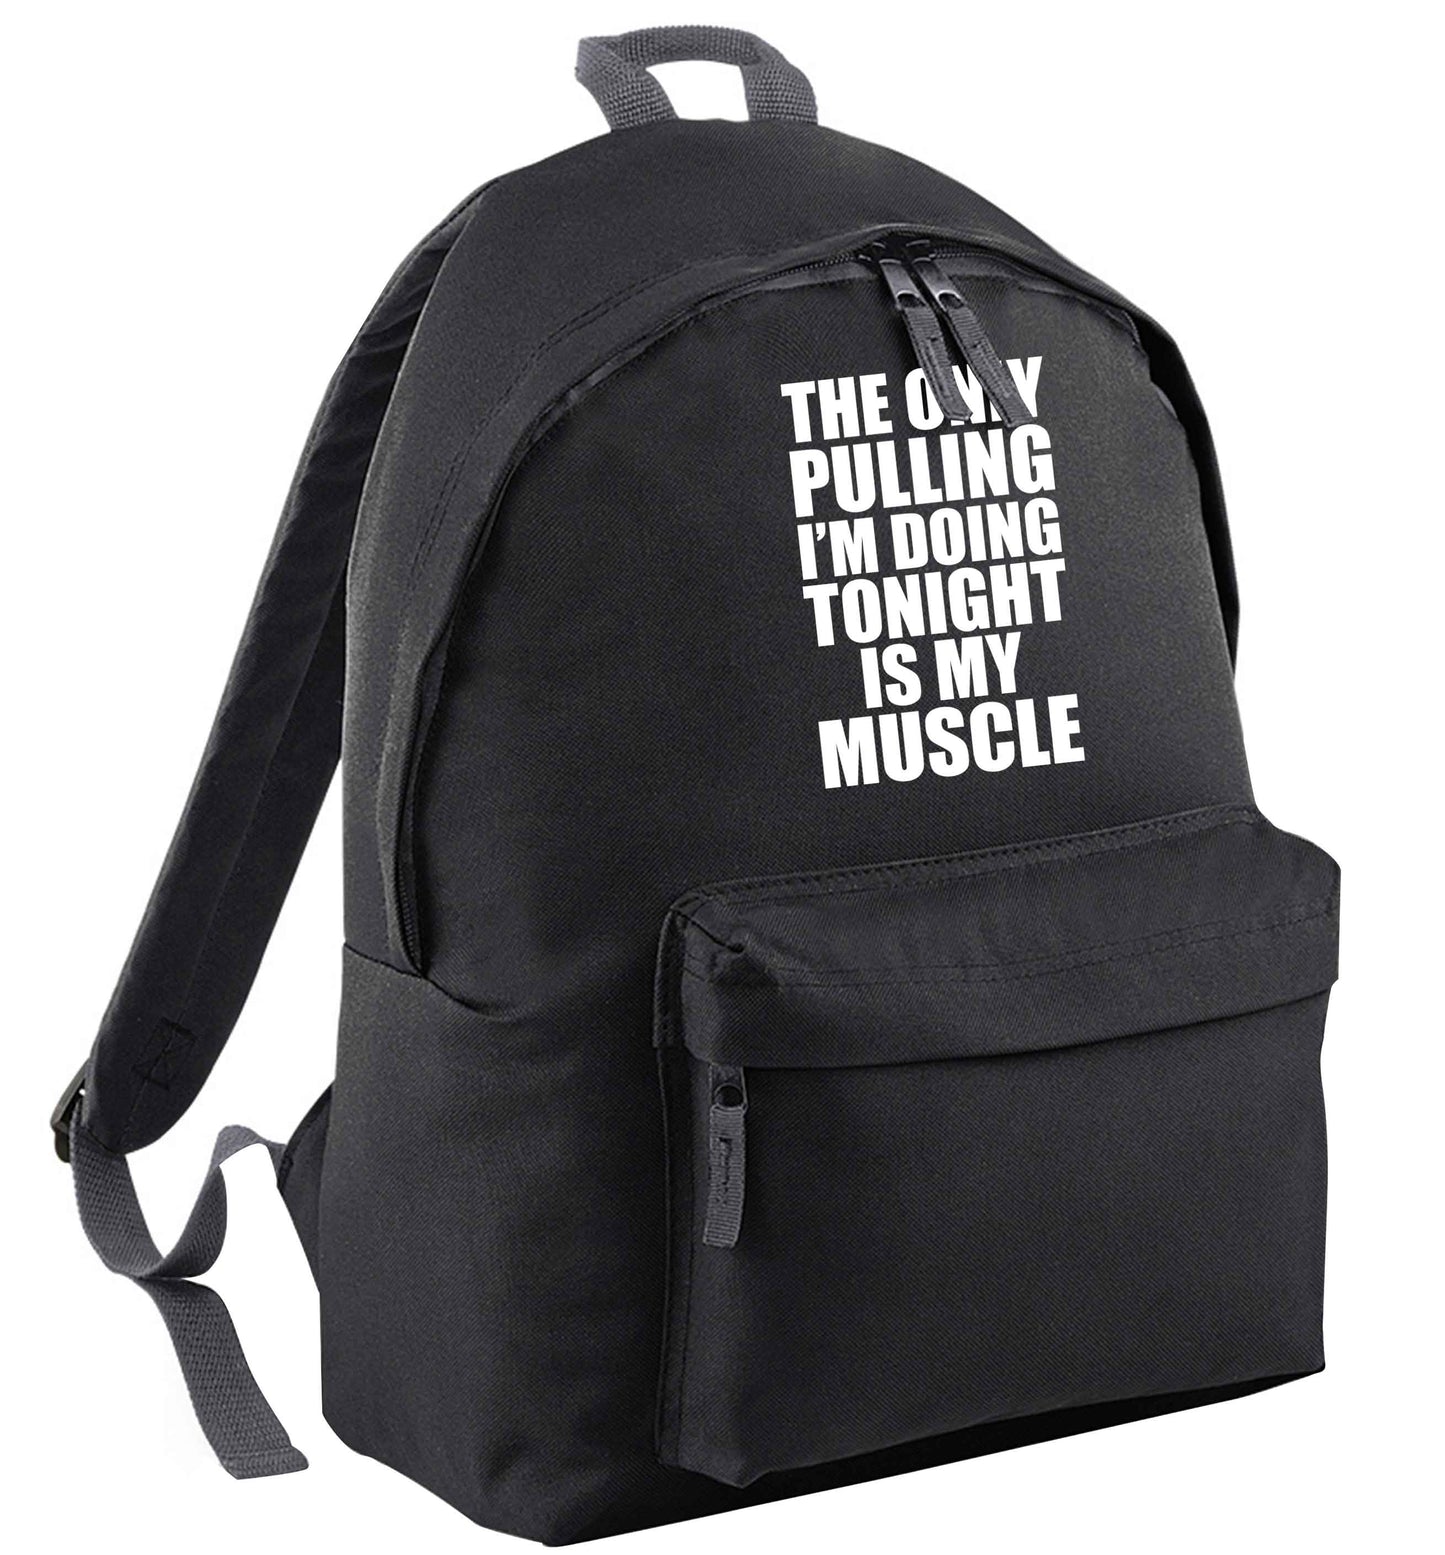 The only pulling I'm doing tonight is my muscle black adults backpack